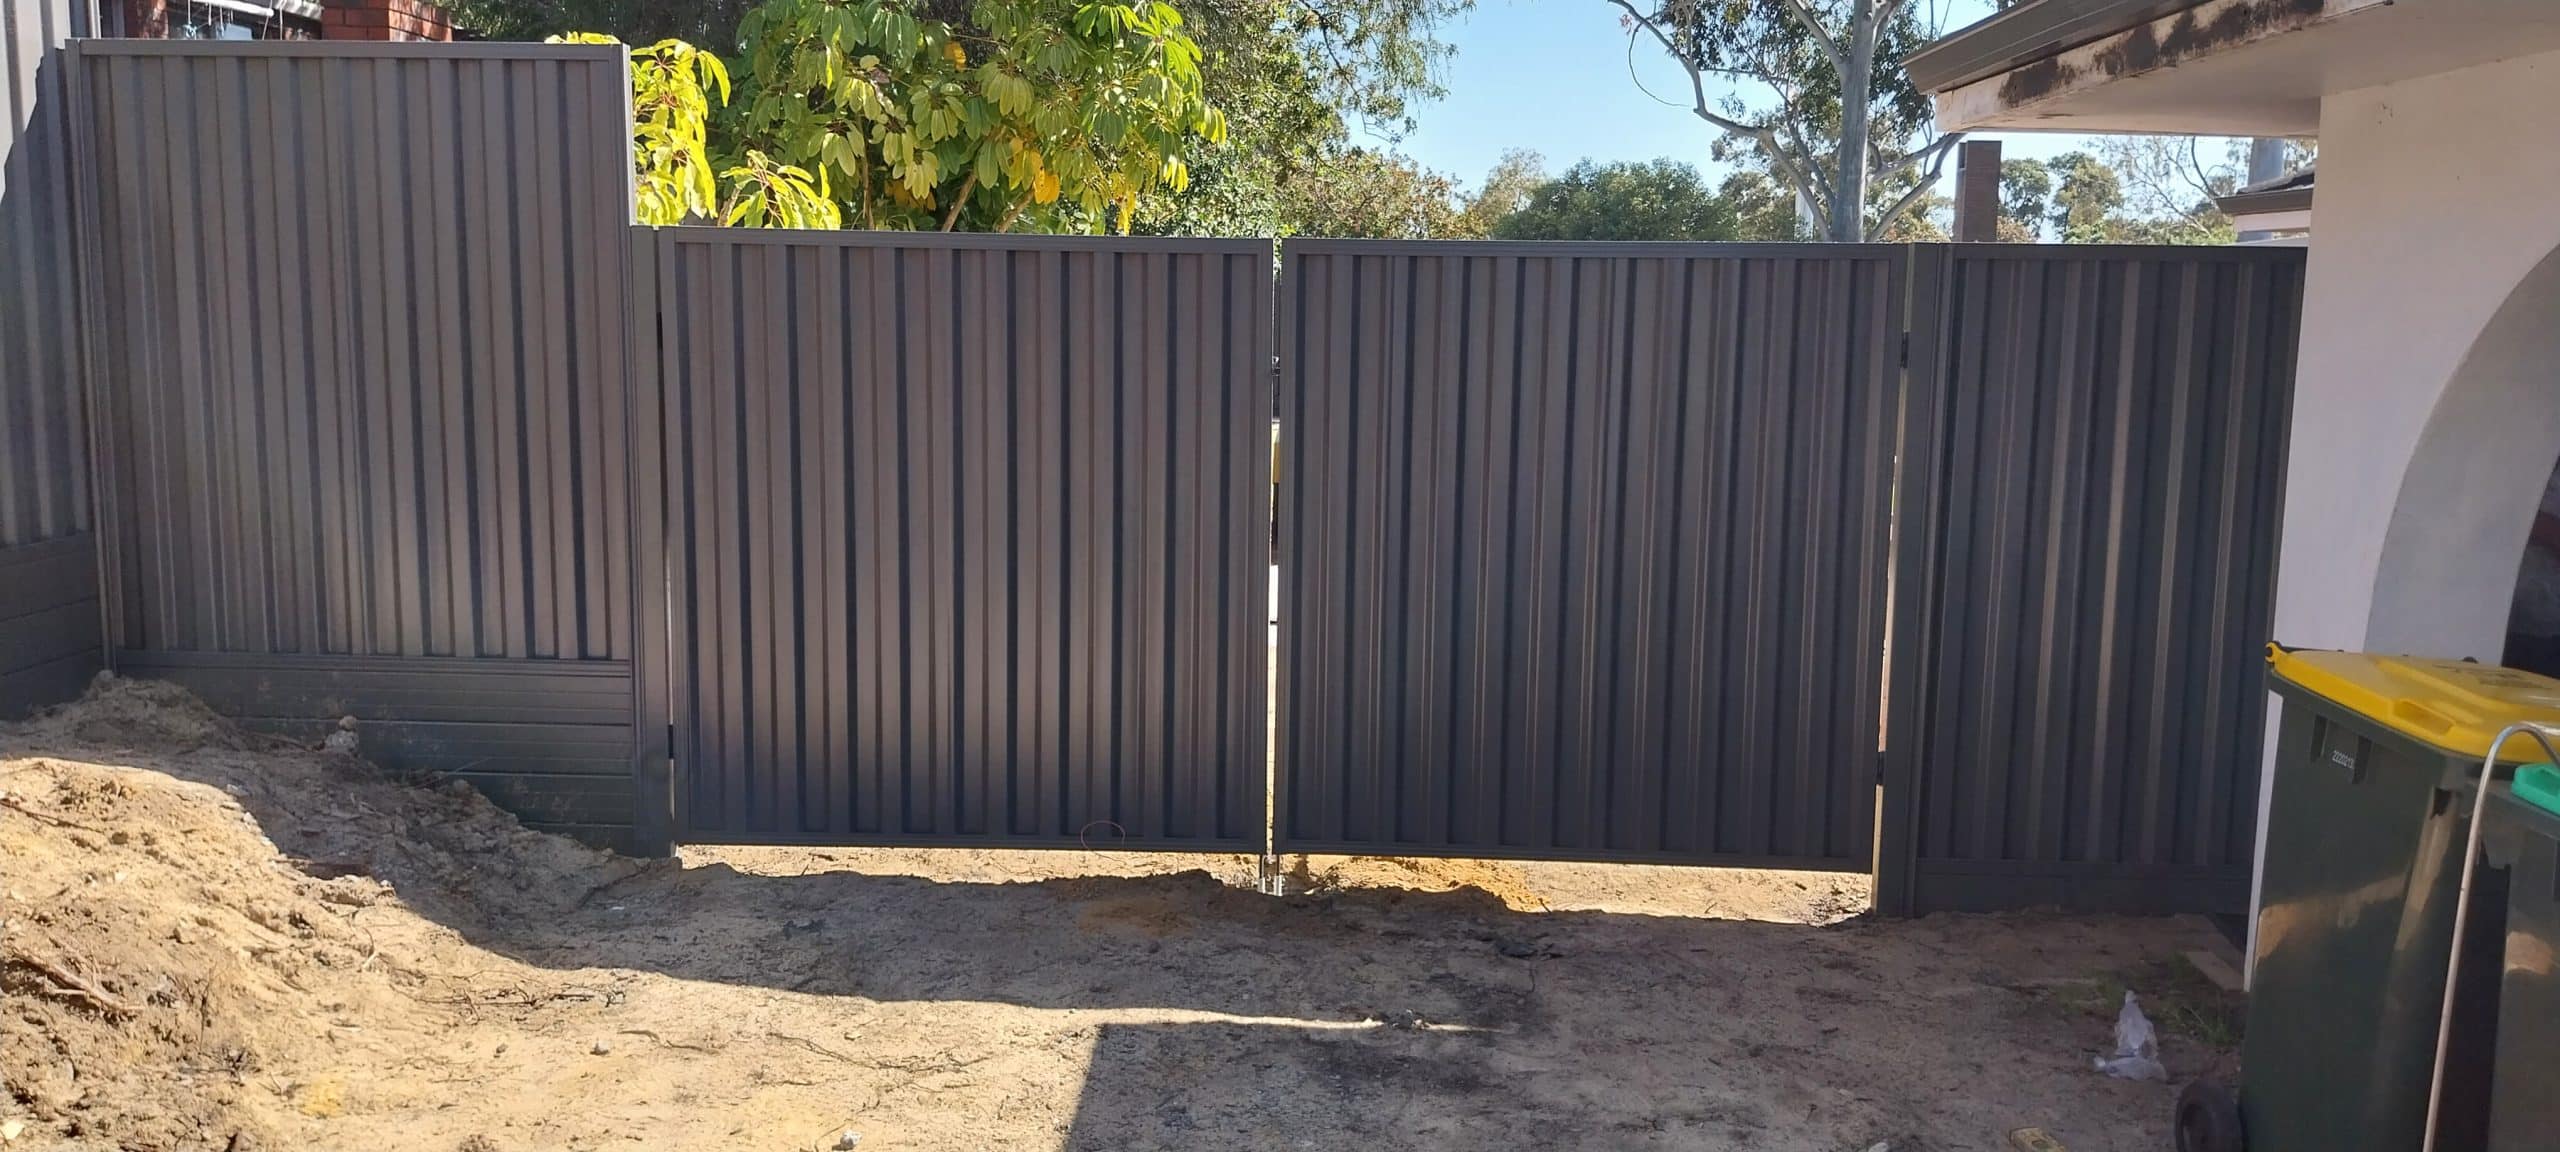 3.6m Double Gate made from Colorbond Steel installed by Fosters Fencing